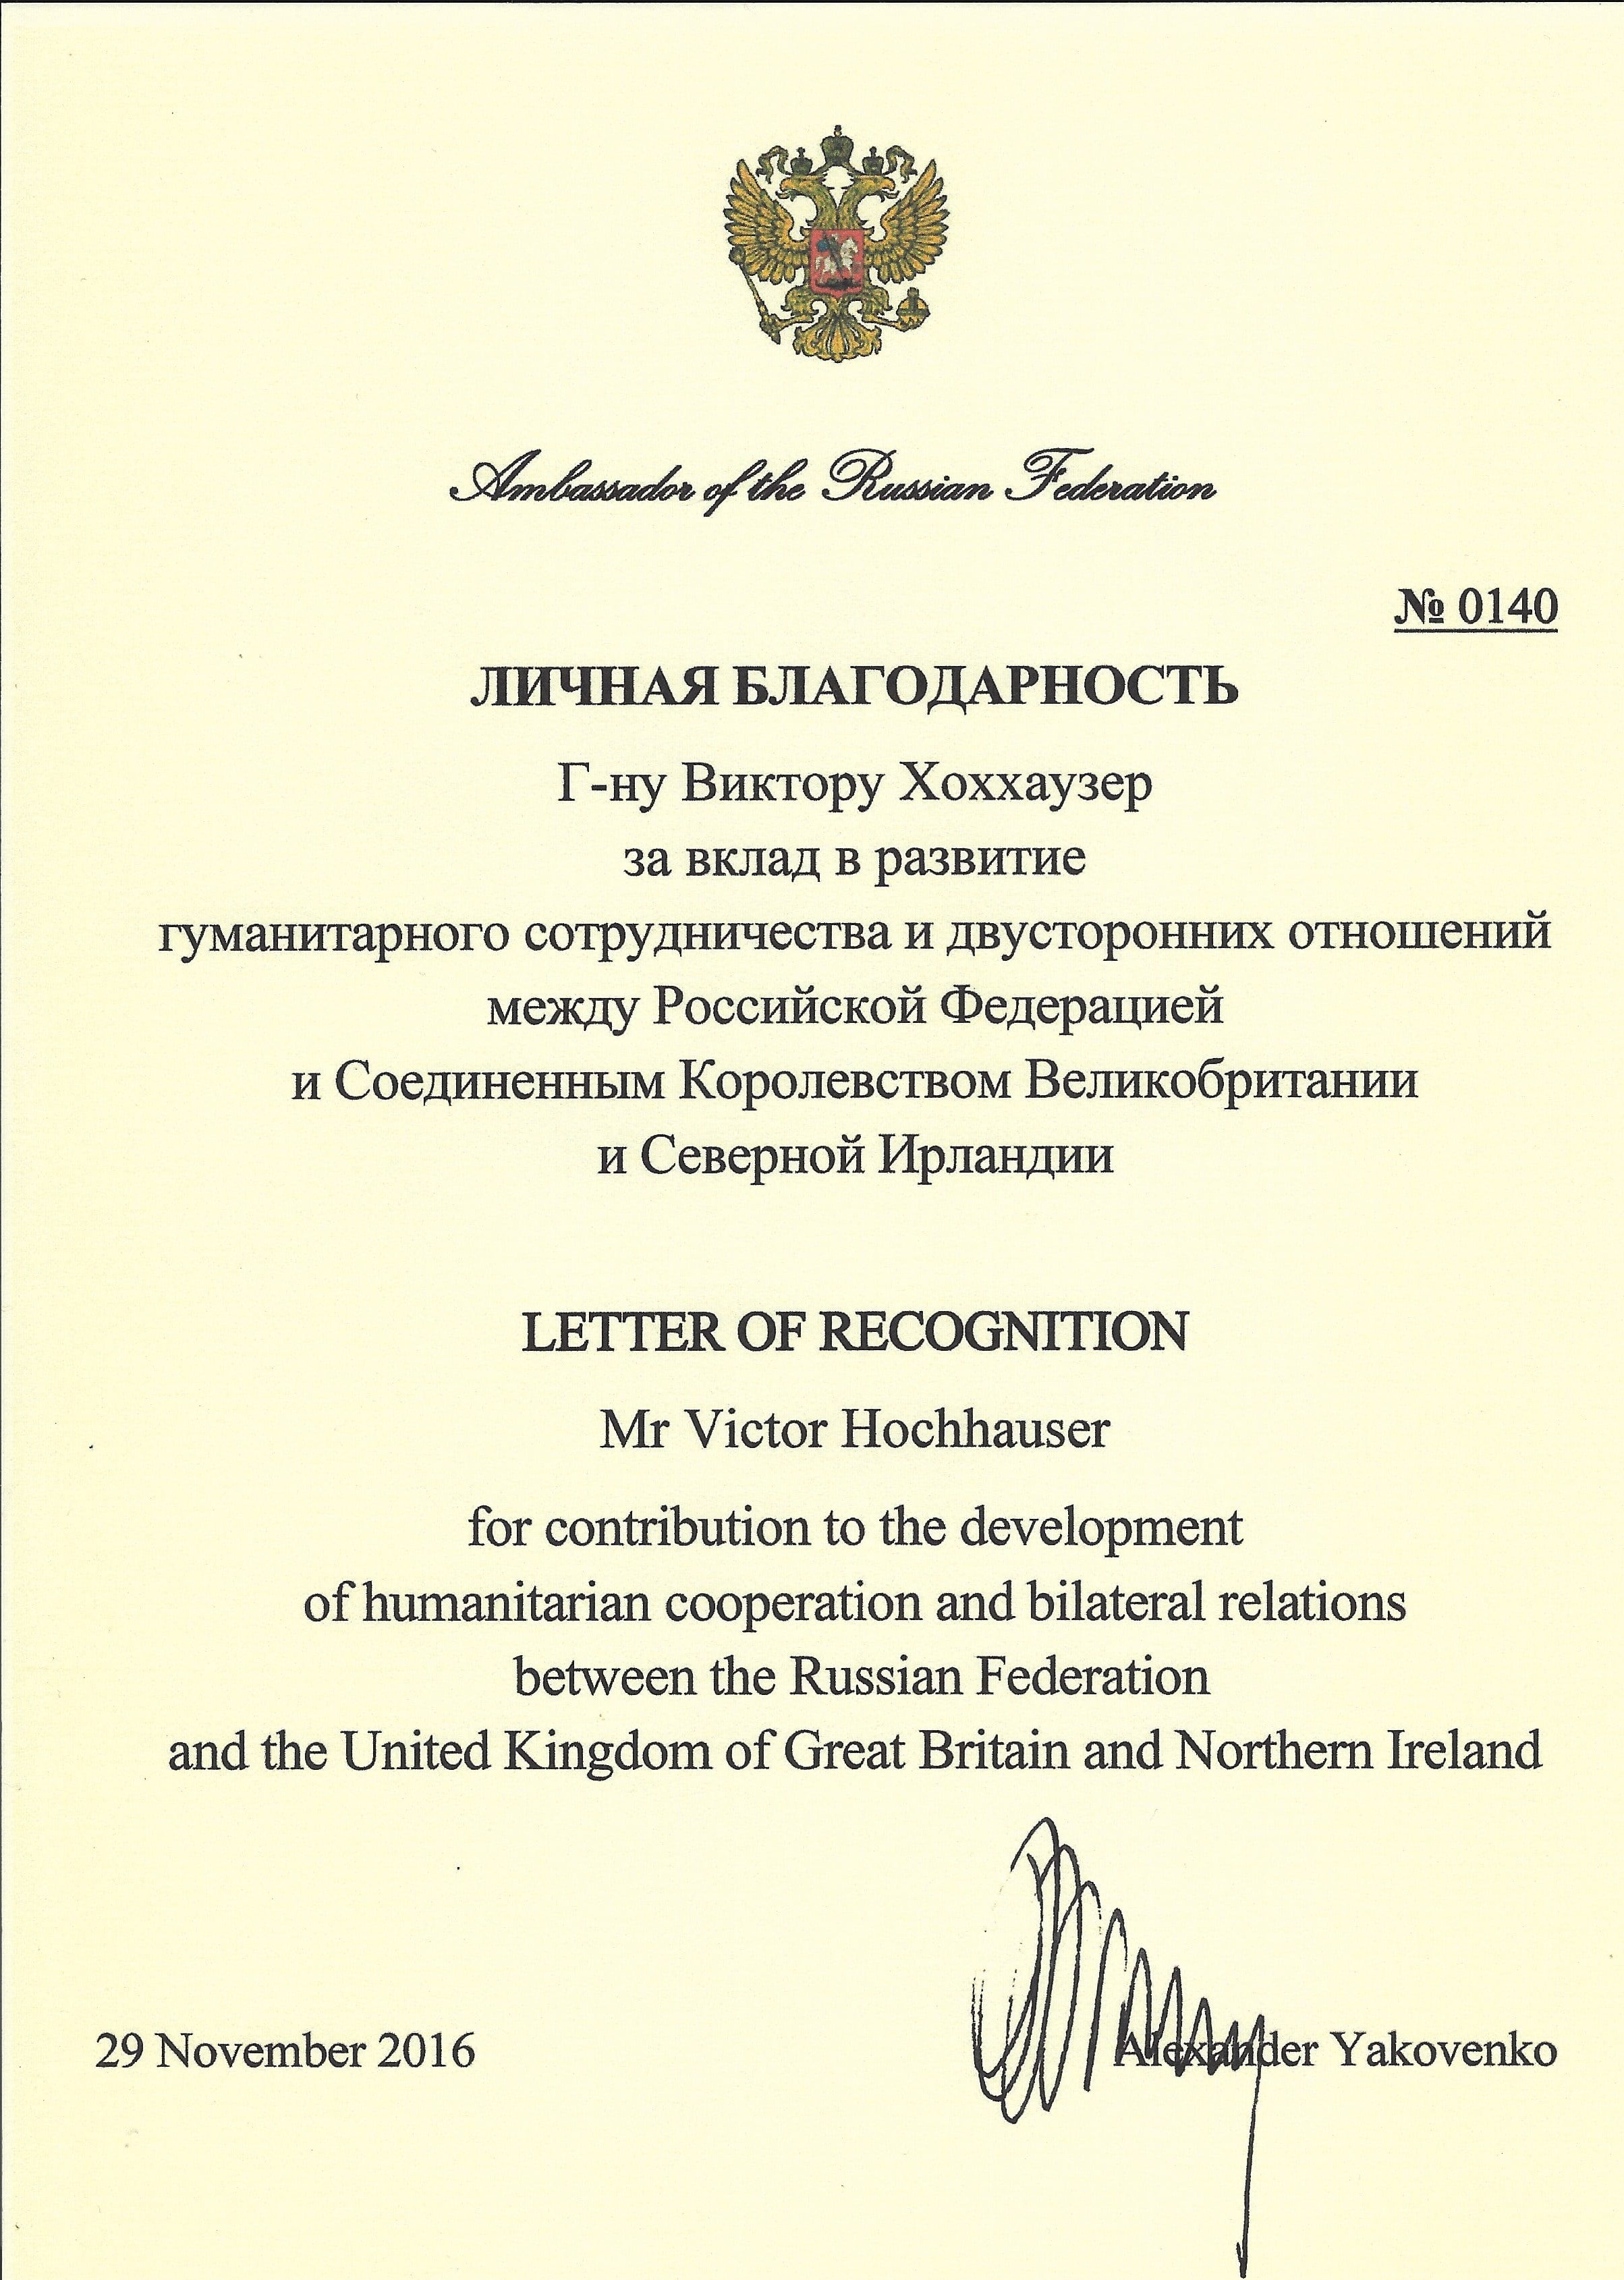 Russian Federation Letter of Recognition, Victor Hochhauser 